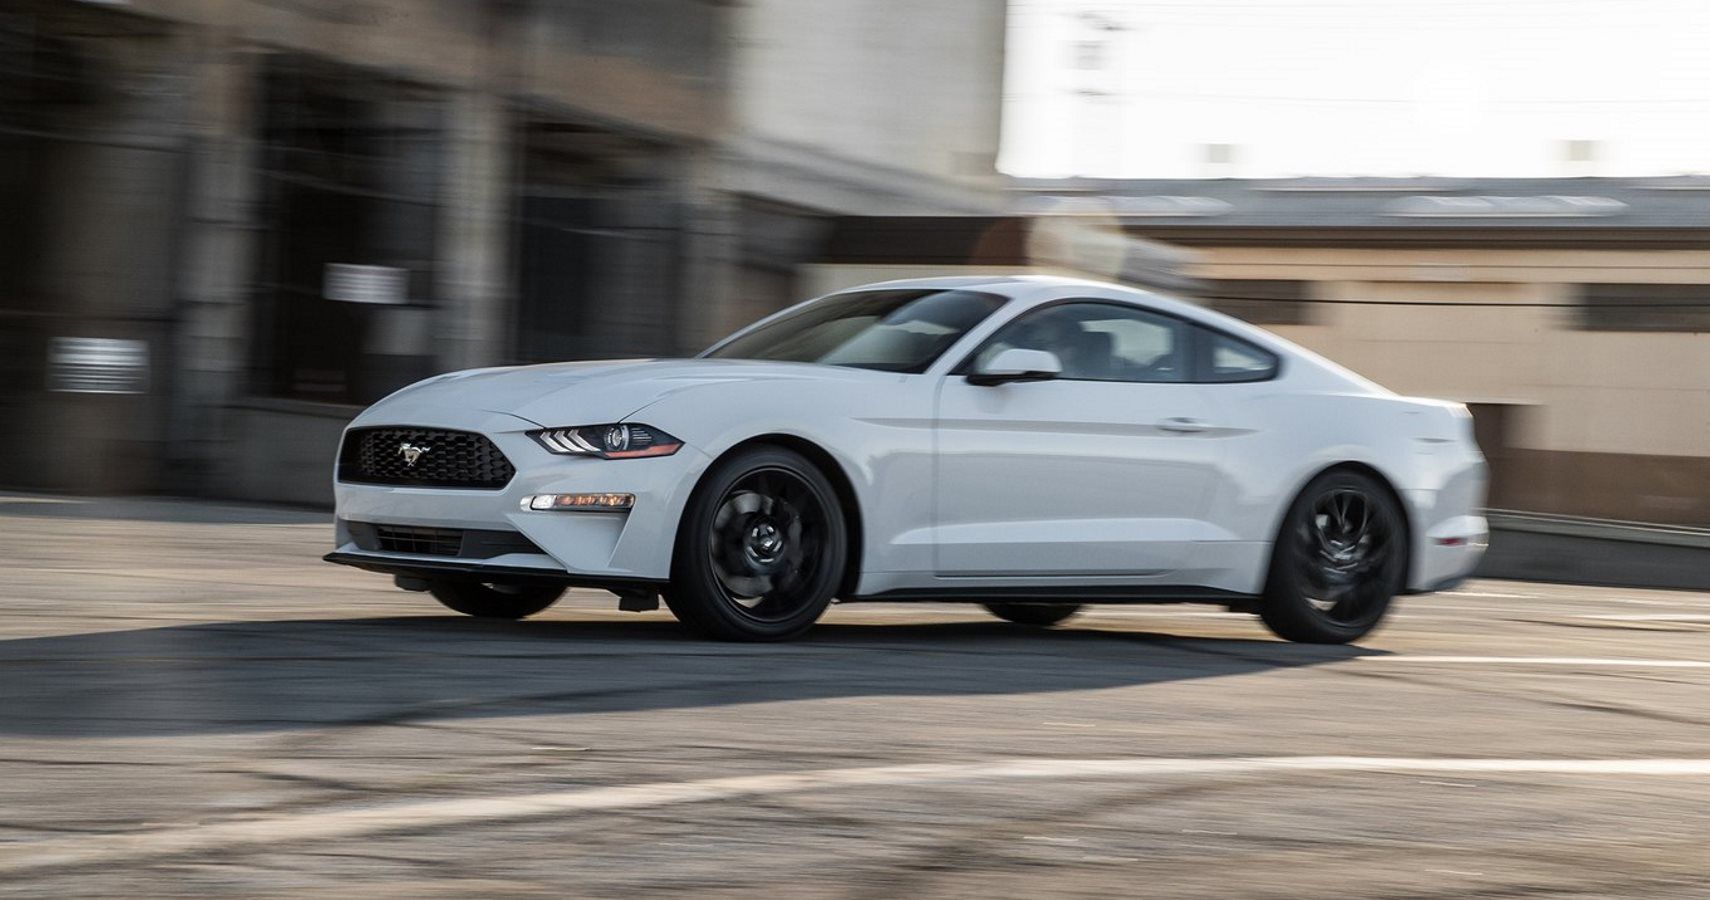 Ford Mustang Review - American Muscle For Everyone